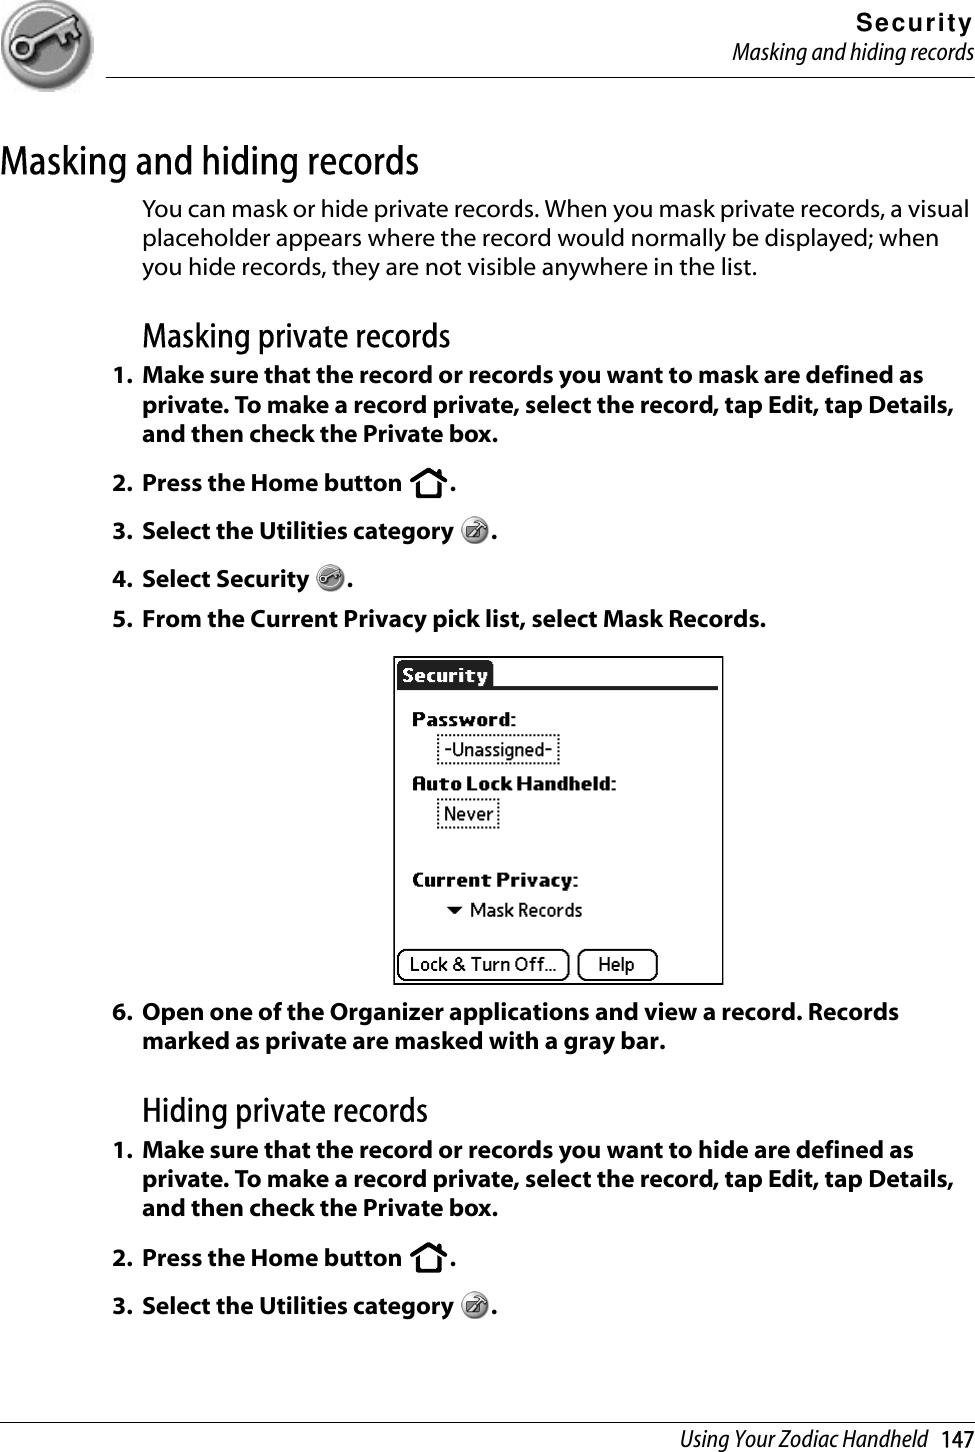 SecurityMasking and hiding recordsUsing Your Zodiac Handheld   147Masking and hiding recordsYou can mask or hide private records. When you mask private records, a visual placeholder appears where the record would normally be displayed; when you hide records, they are not visible anywhere in the list. Masking private records1. Make sure that the record or records you want to mask are defined as private. To make a record private, select the record, tap Edit, tap Details, and then check the Private box. 2. Press the Home button  . 3. Select the Utilities category  .4. Select Security  .5. From the Current Privacy pick list, select Mask Records. 6. Open one of the Organizer applications and view a record. Records marked as private are masked with a gray bar. Hiding private records1. Make sure that the record or records you want to hide are defined as private. To make a record private, select the record, tap Edit, tap Details, and then check the Private box. 2. Press the Home button  . 3. Select the Utilities category  .